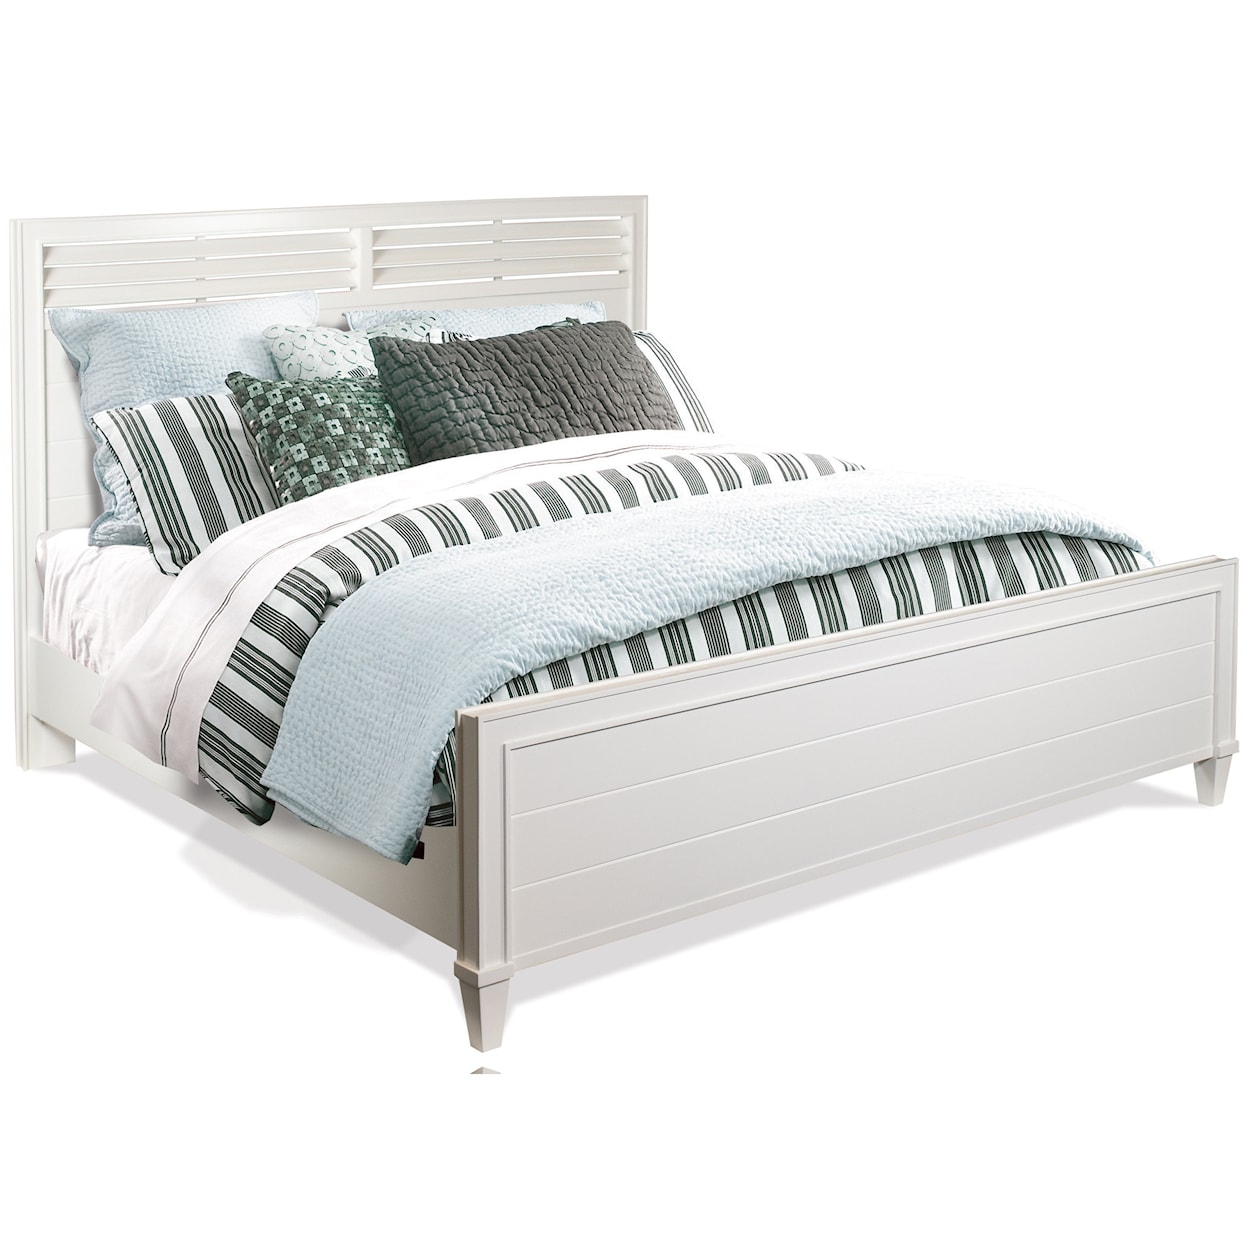 Riverside Furniture Talford Cotton Queen Bed